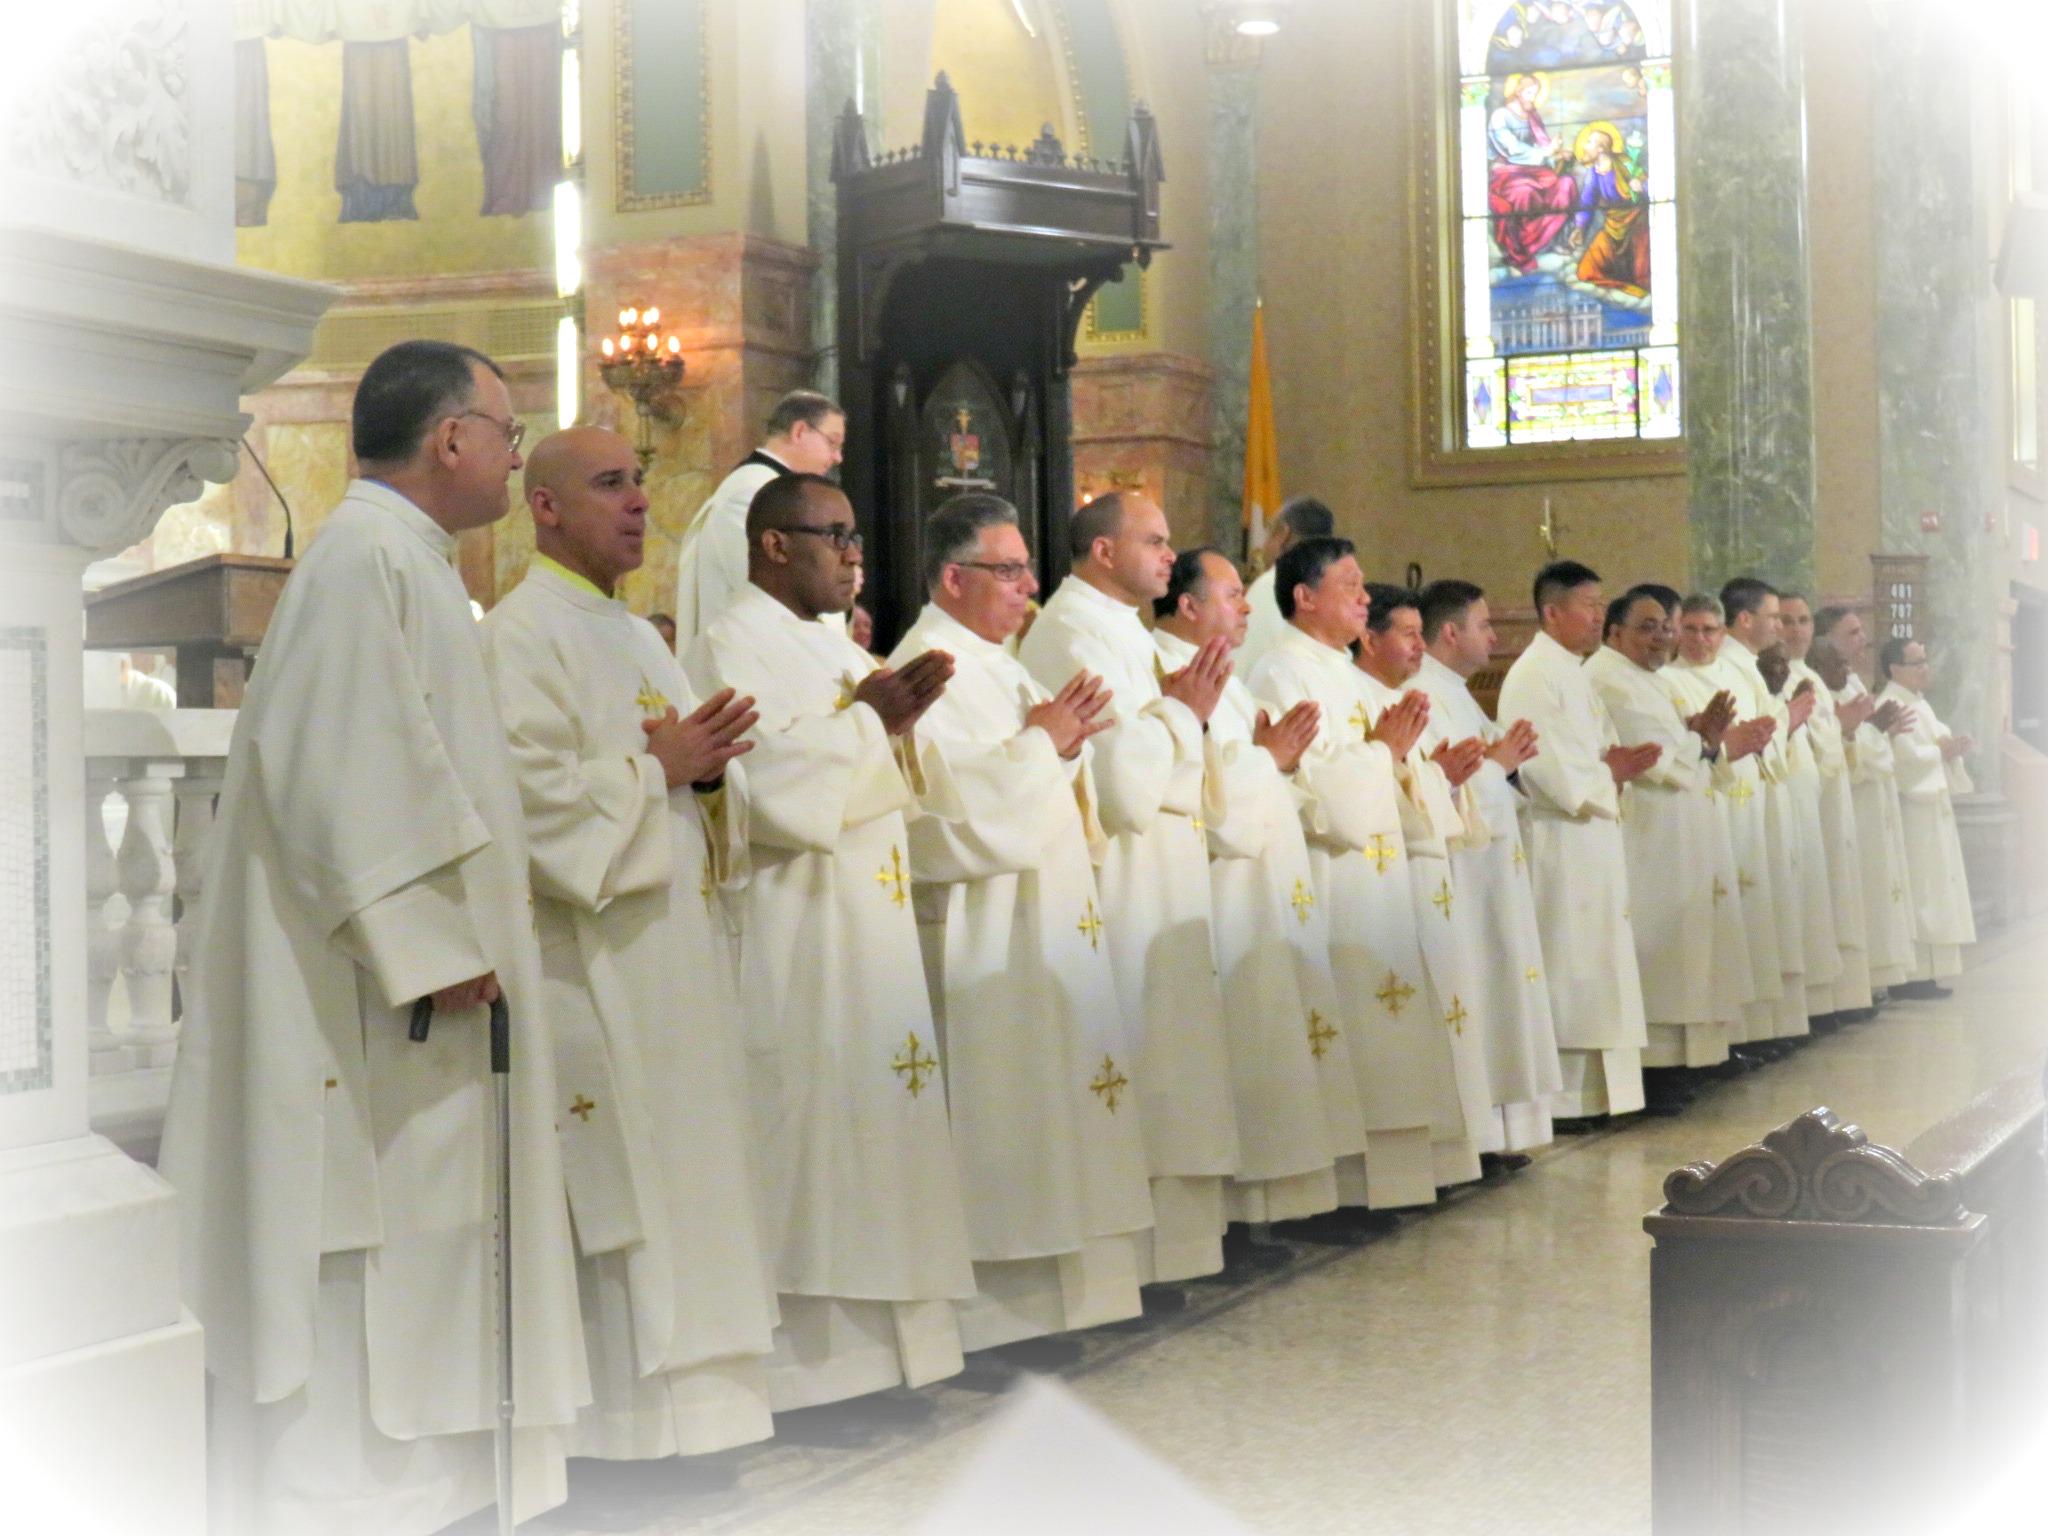 Pentecost Is At Work A Great Day In Brooklyn As New Deacons